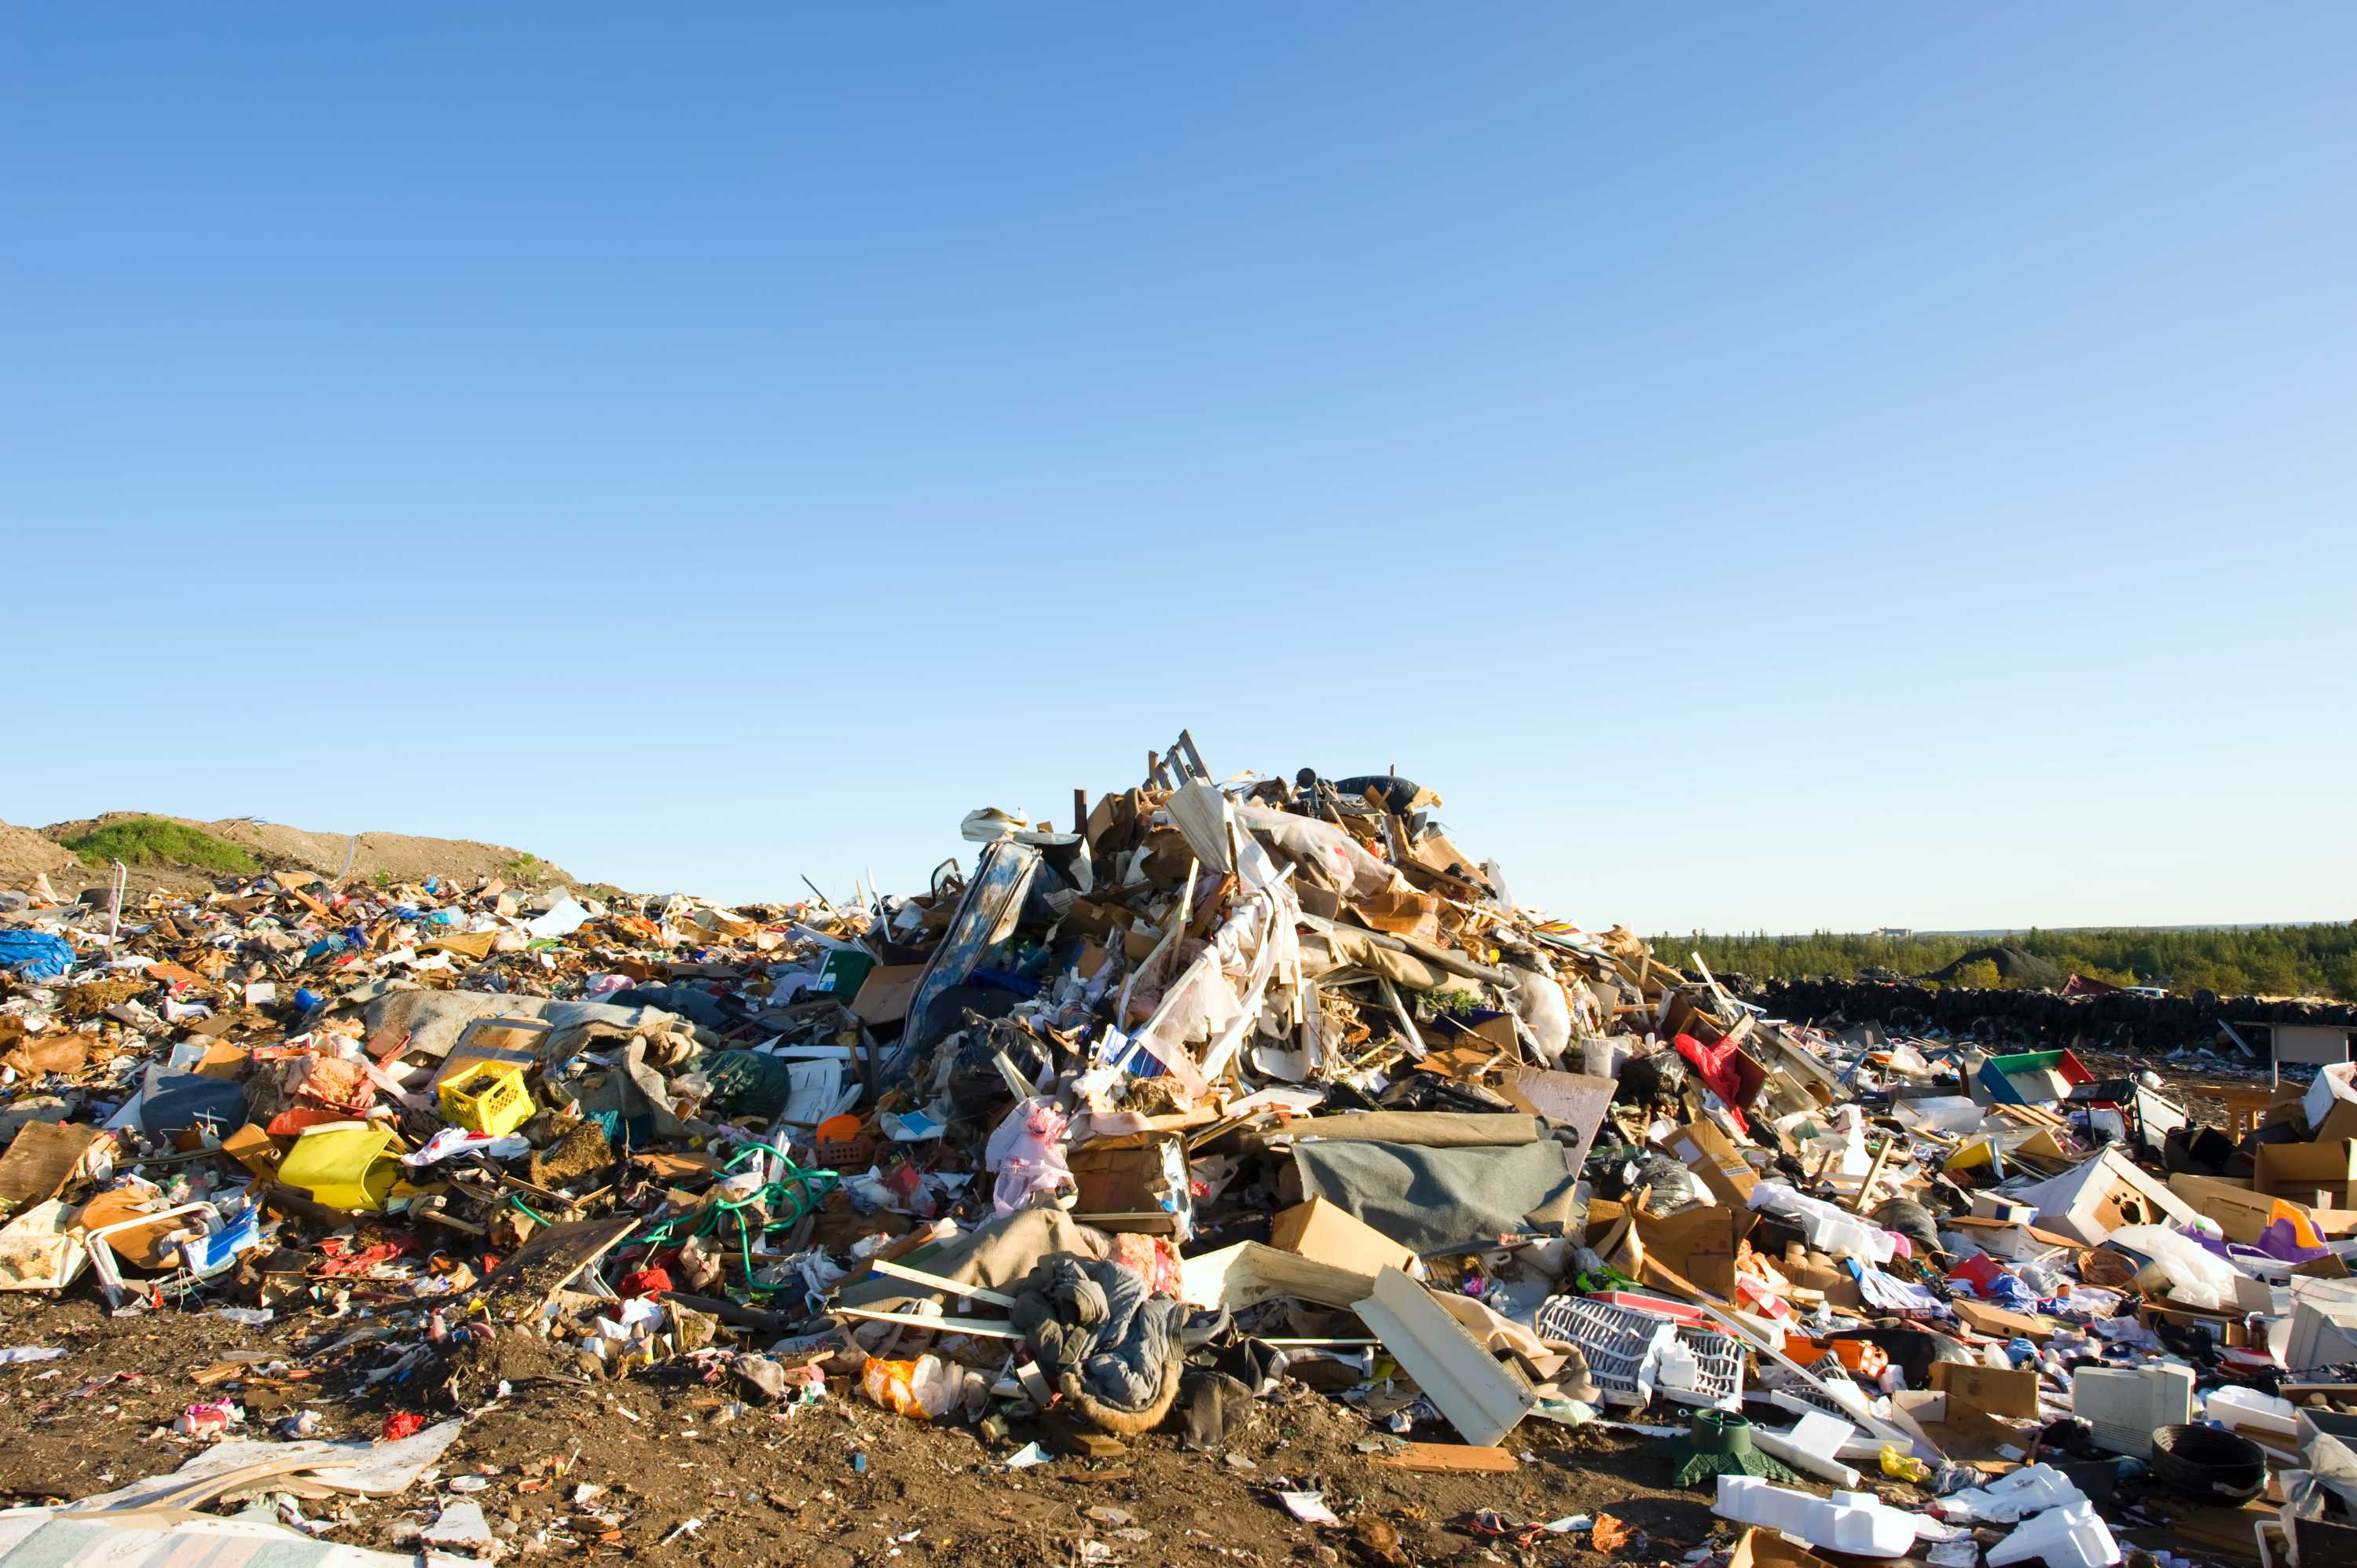 Waste management: ingenuity, mindset and working with nature